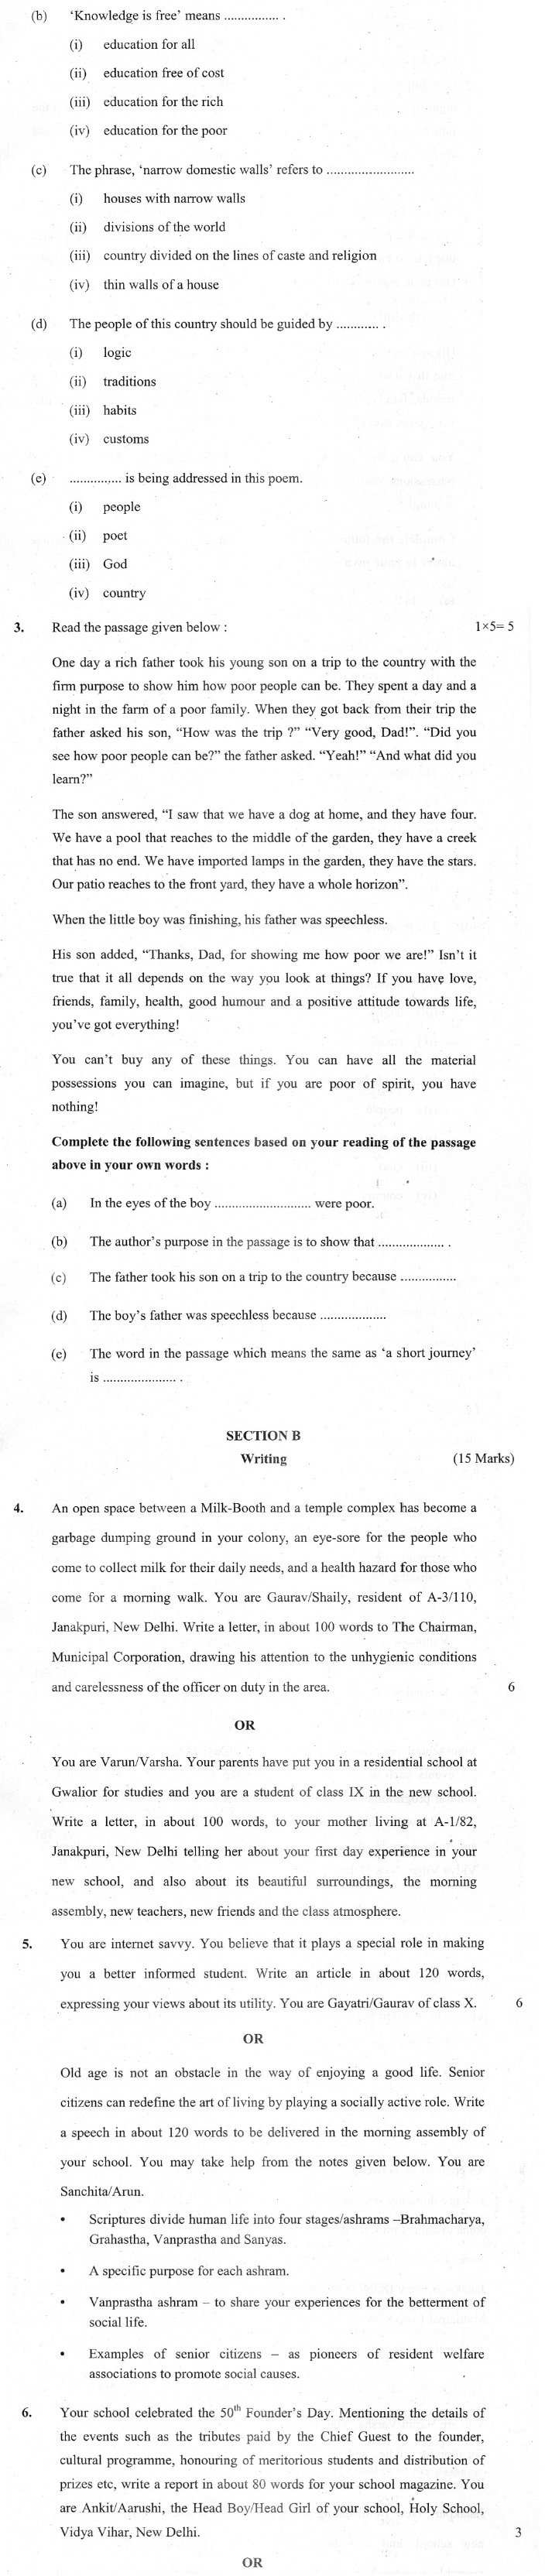 CBSE Class X Previous Year Question Papers 2012 English Language and Literature